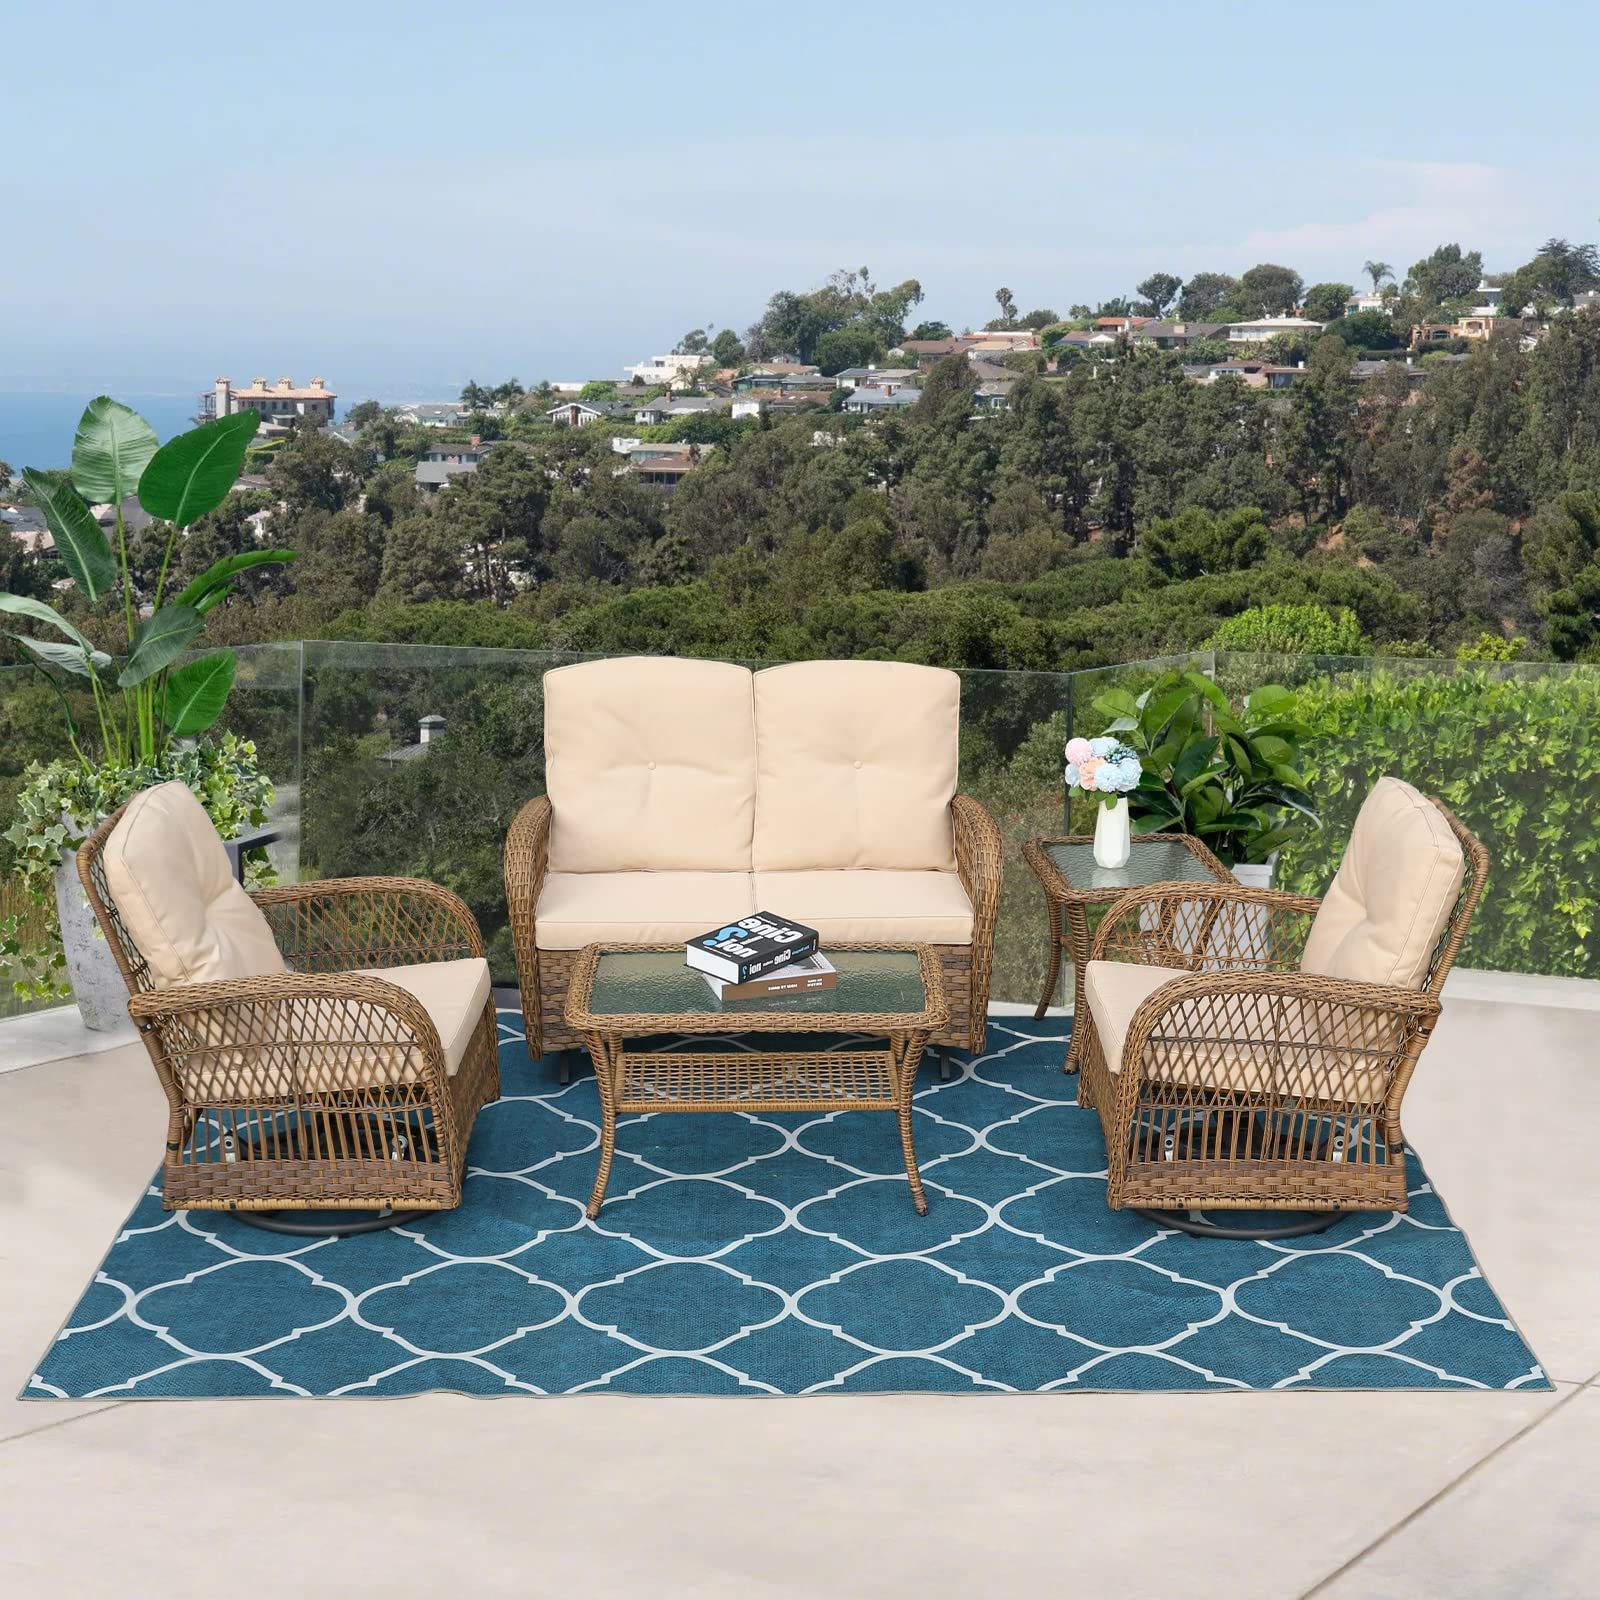 Most Popular Amazon: Vivijason 5 Piece Outdoor Patio Wicker Conversation Sets, All  Weather Outdoor Rattan Furniture Set Includes Glider Loveseat, 2 Coffee  Table, 2 Swivel Gliders Chairs With Cushions, Light Brown : Patio, Lawn &  Garden Within 2 Piece Swivel Gliders With Patio Cover (Photo 6 of 15)